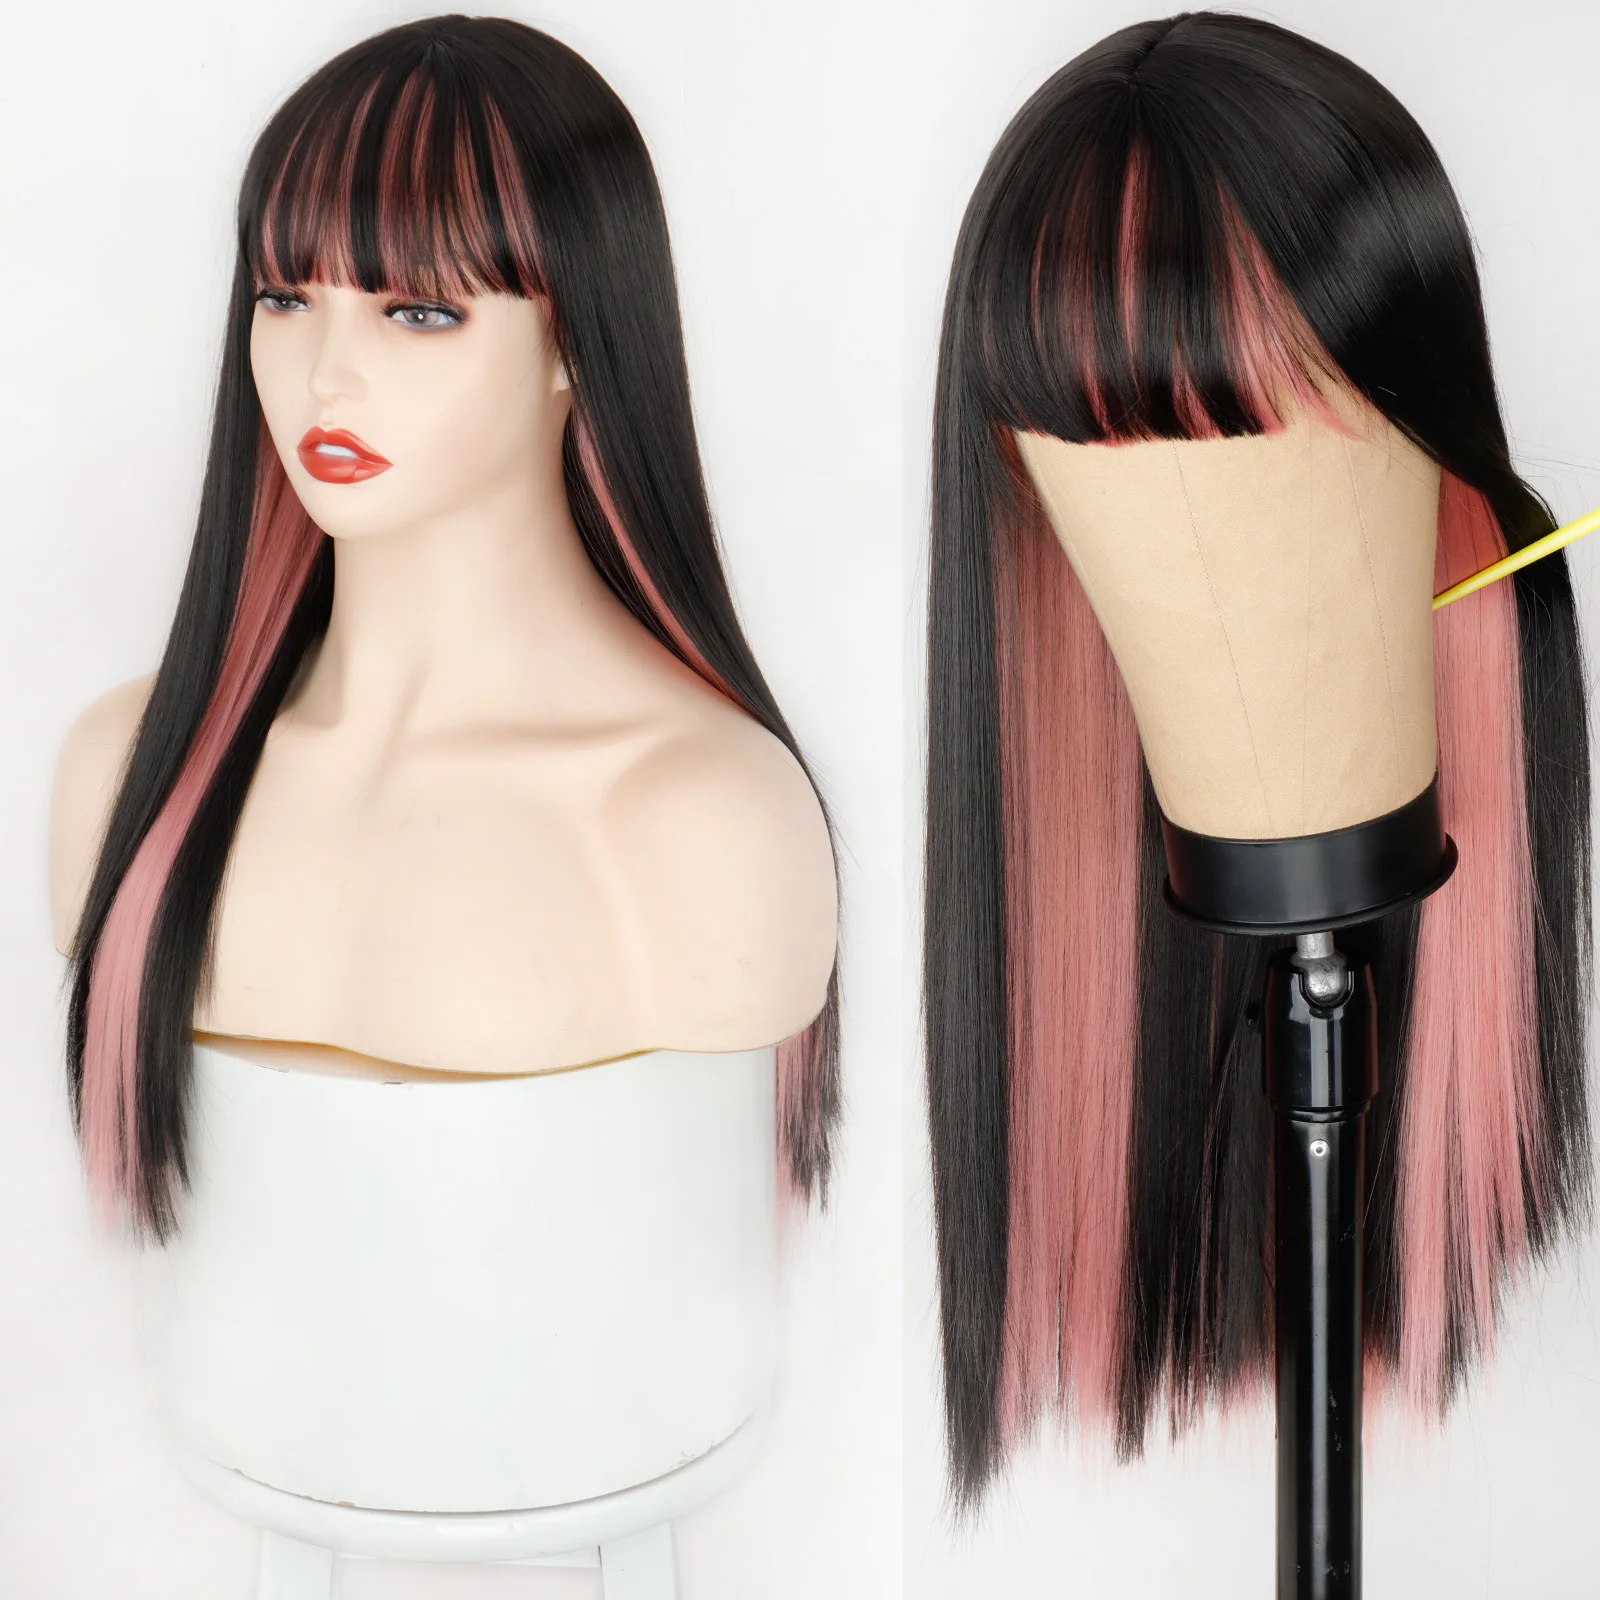 Synthetic Hair Pink and Black Wig Two layers of Wigs Long Straight hair Cosplay Wig Two Tone Ombre Color Women Wigs Lolita Wig